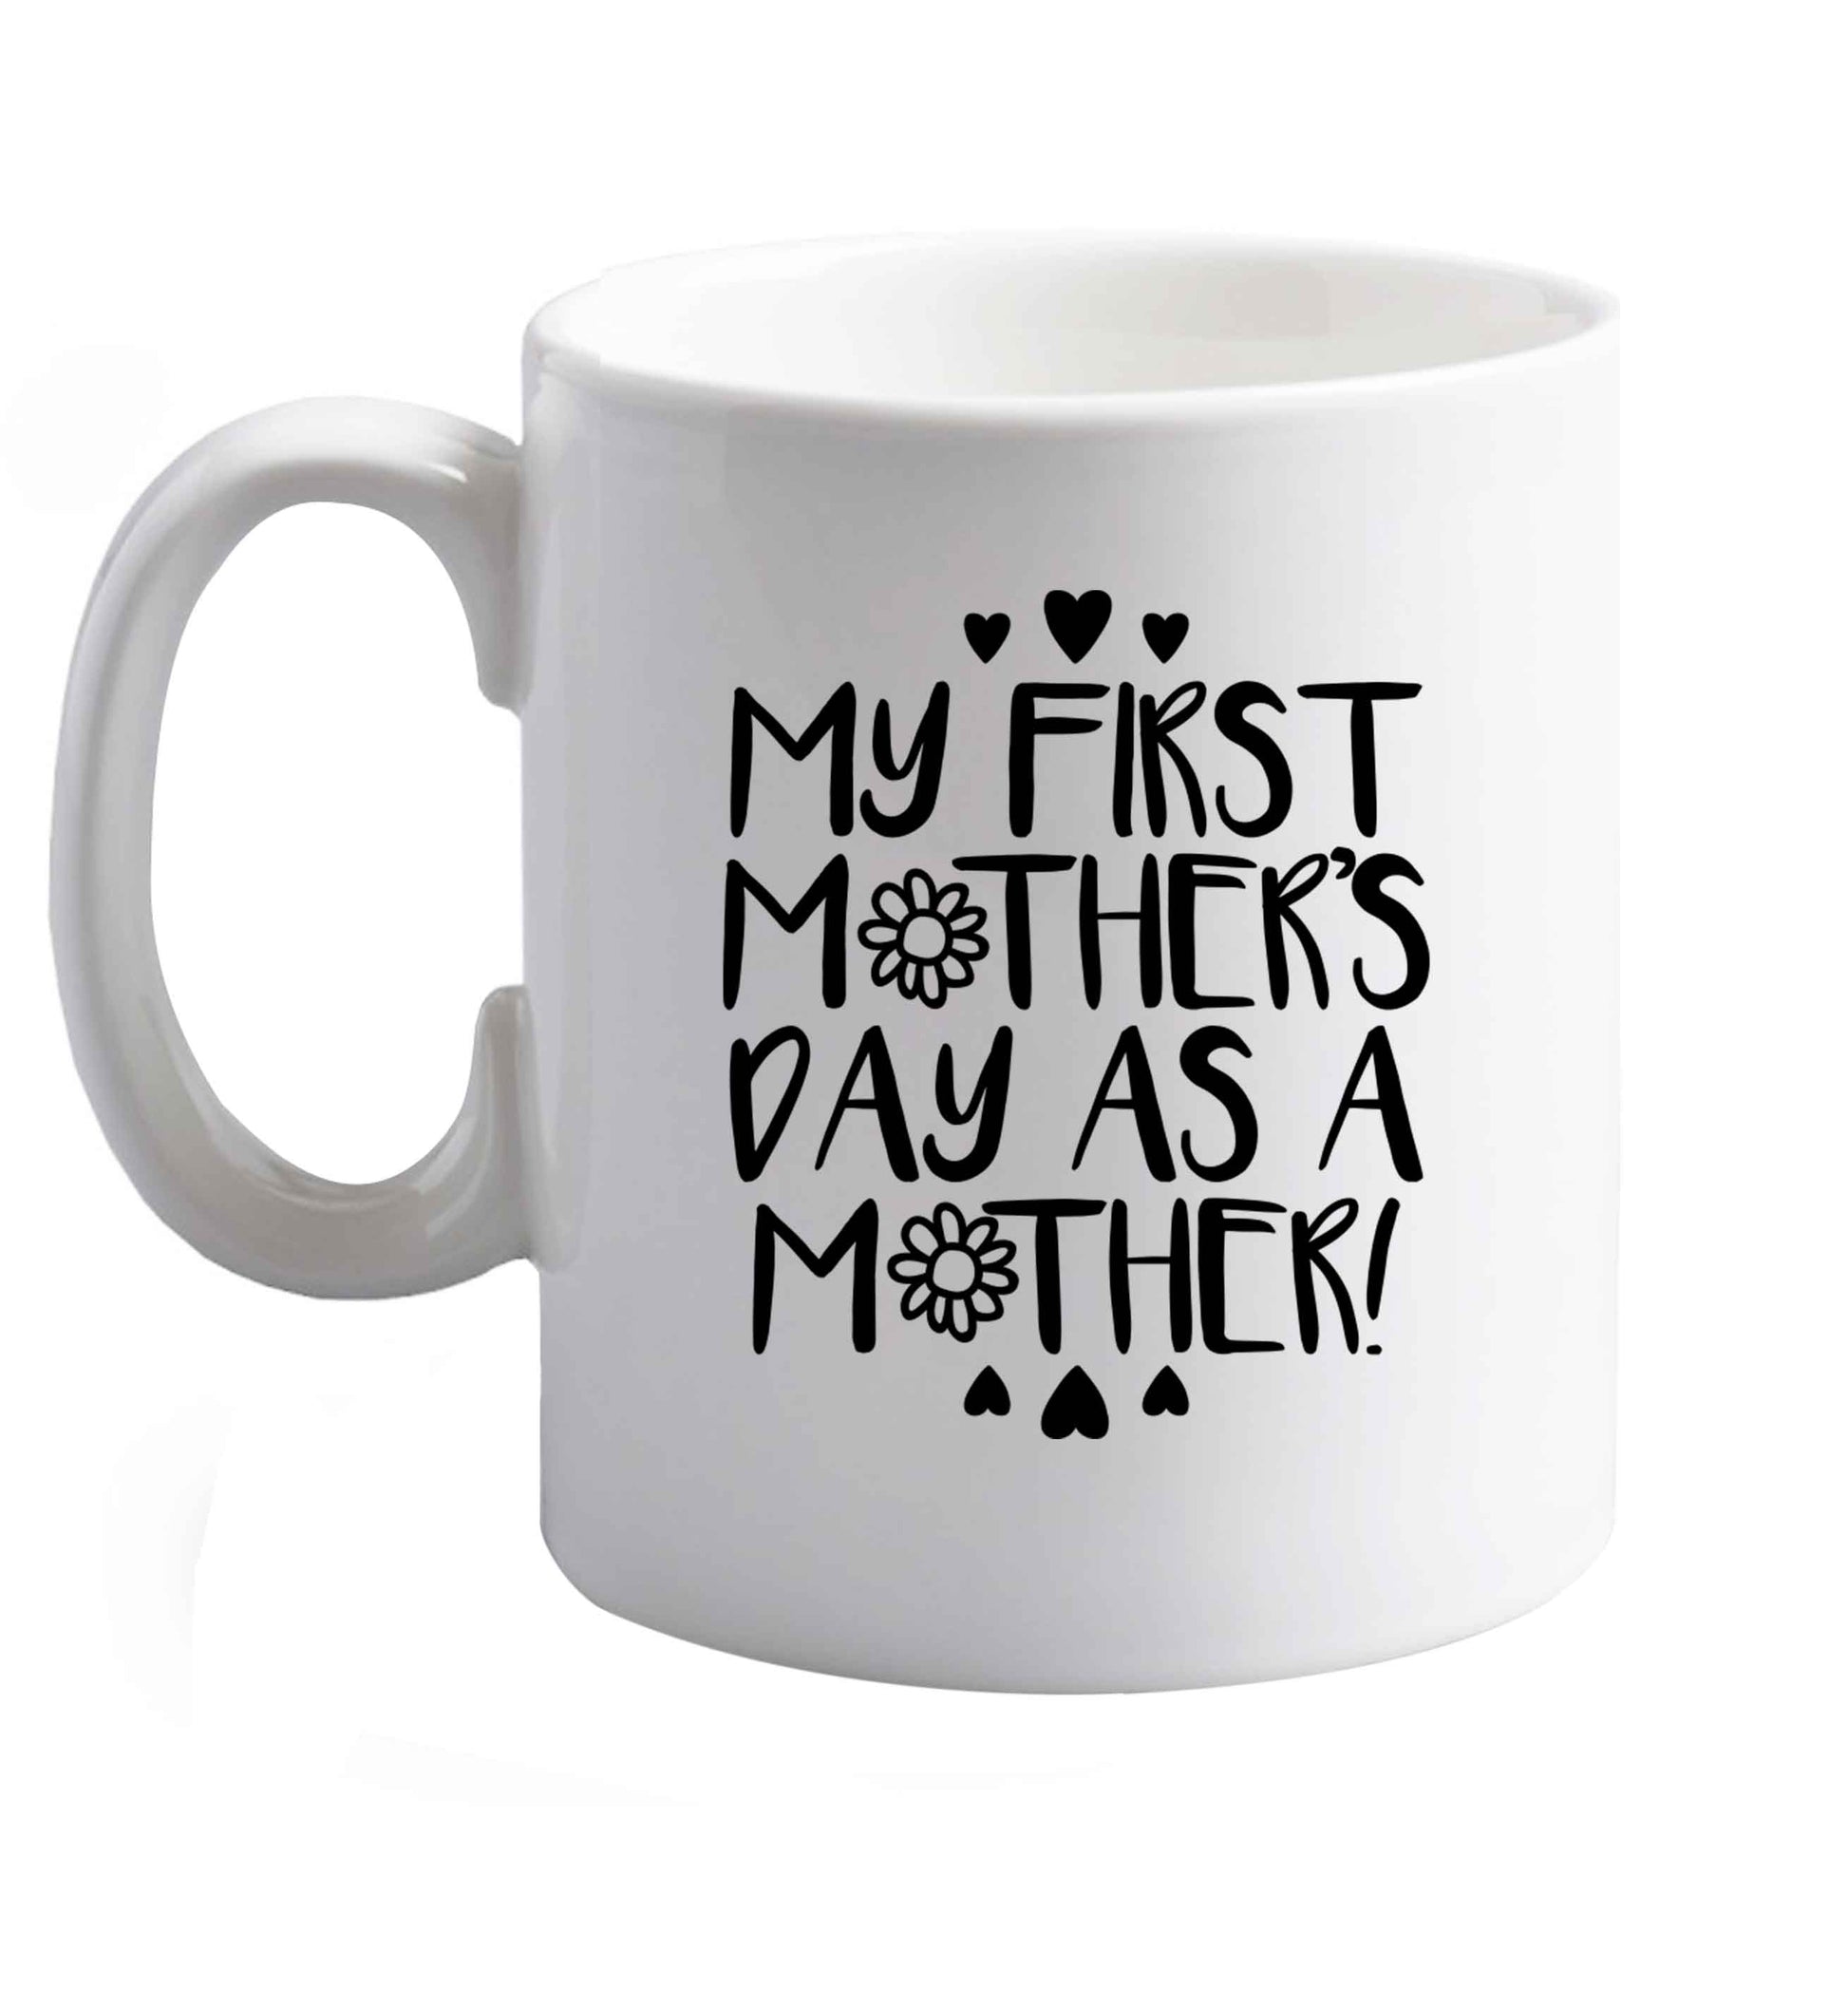 10 oz It's my first mother's day as a mother ceramic mug right handed